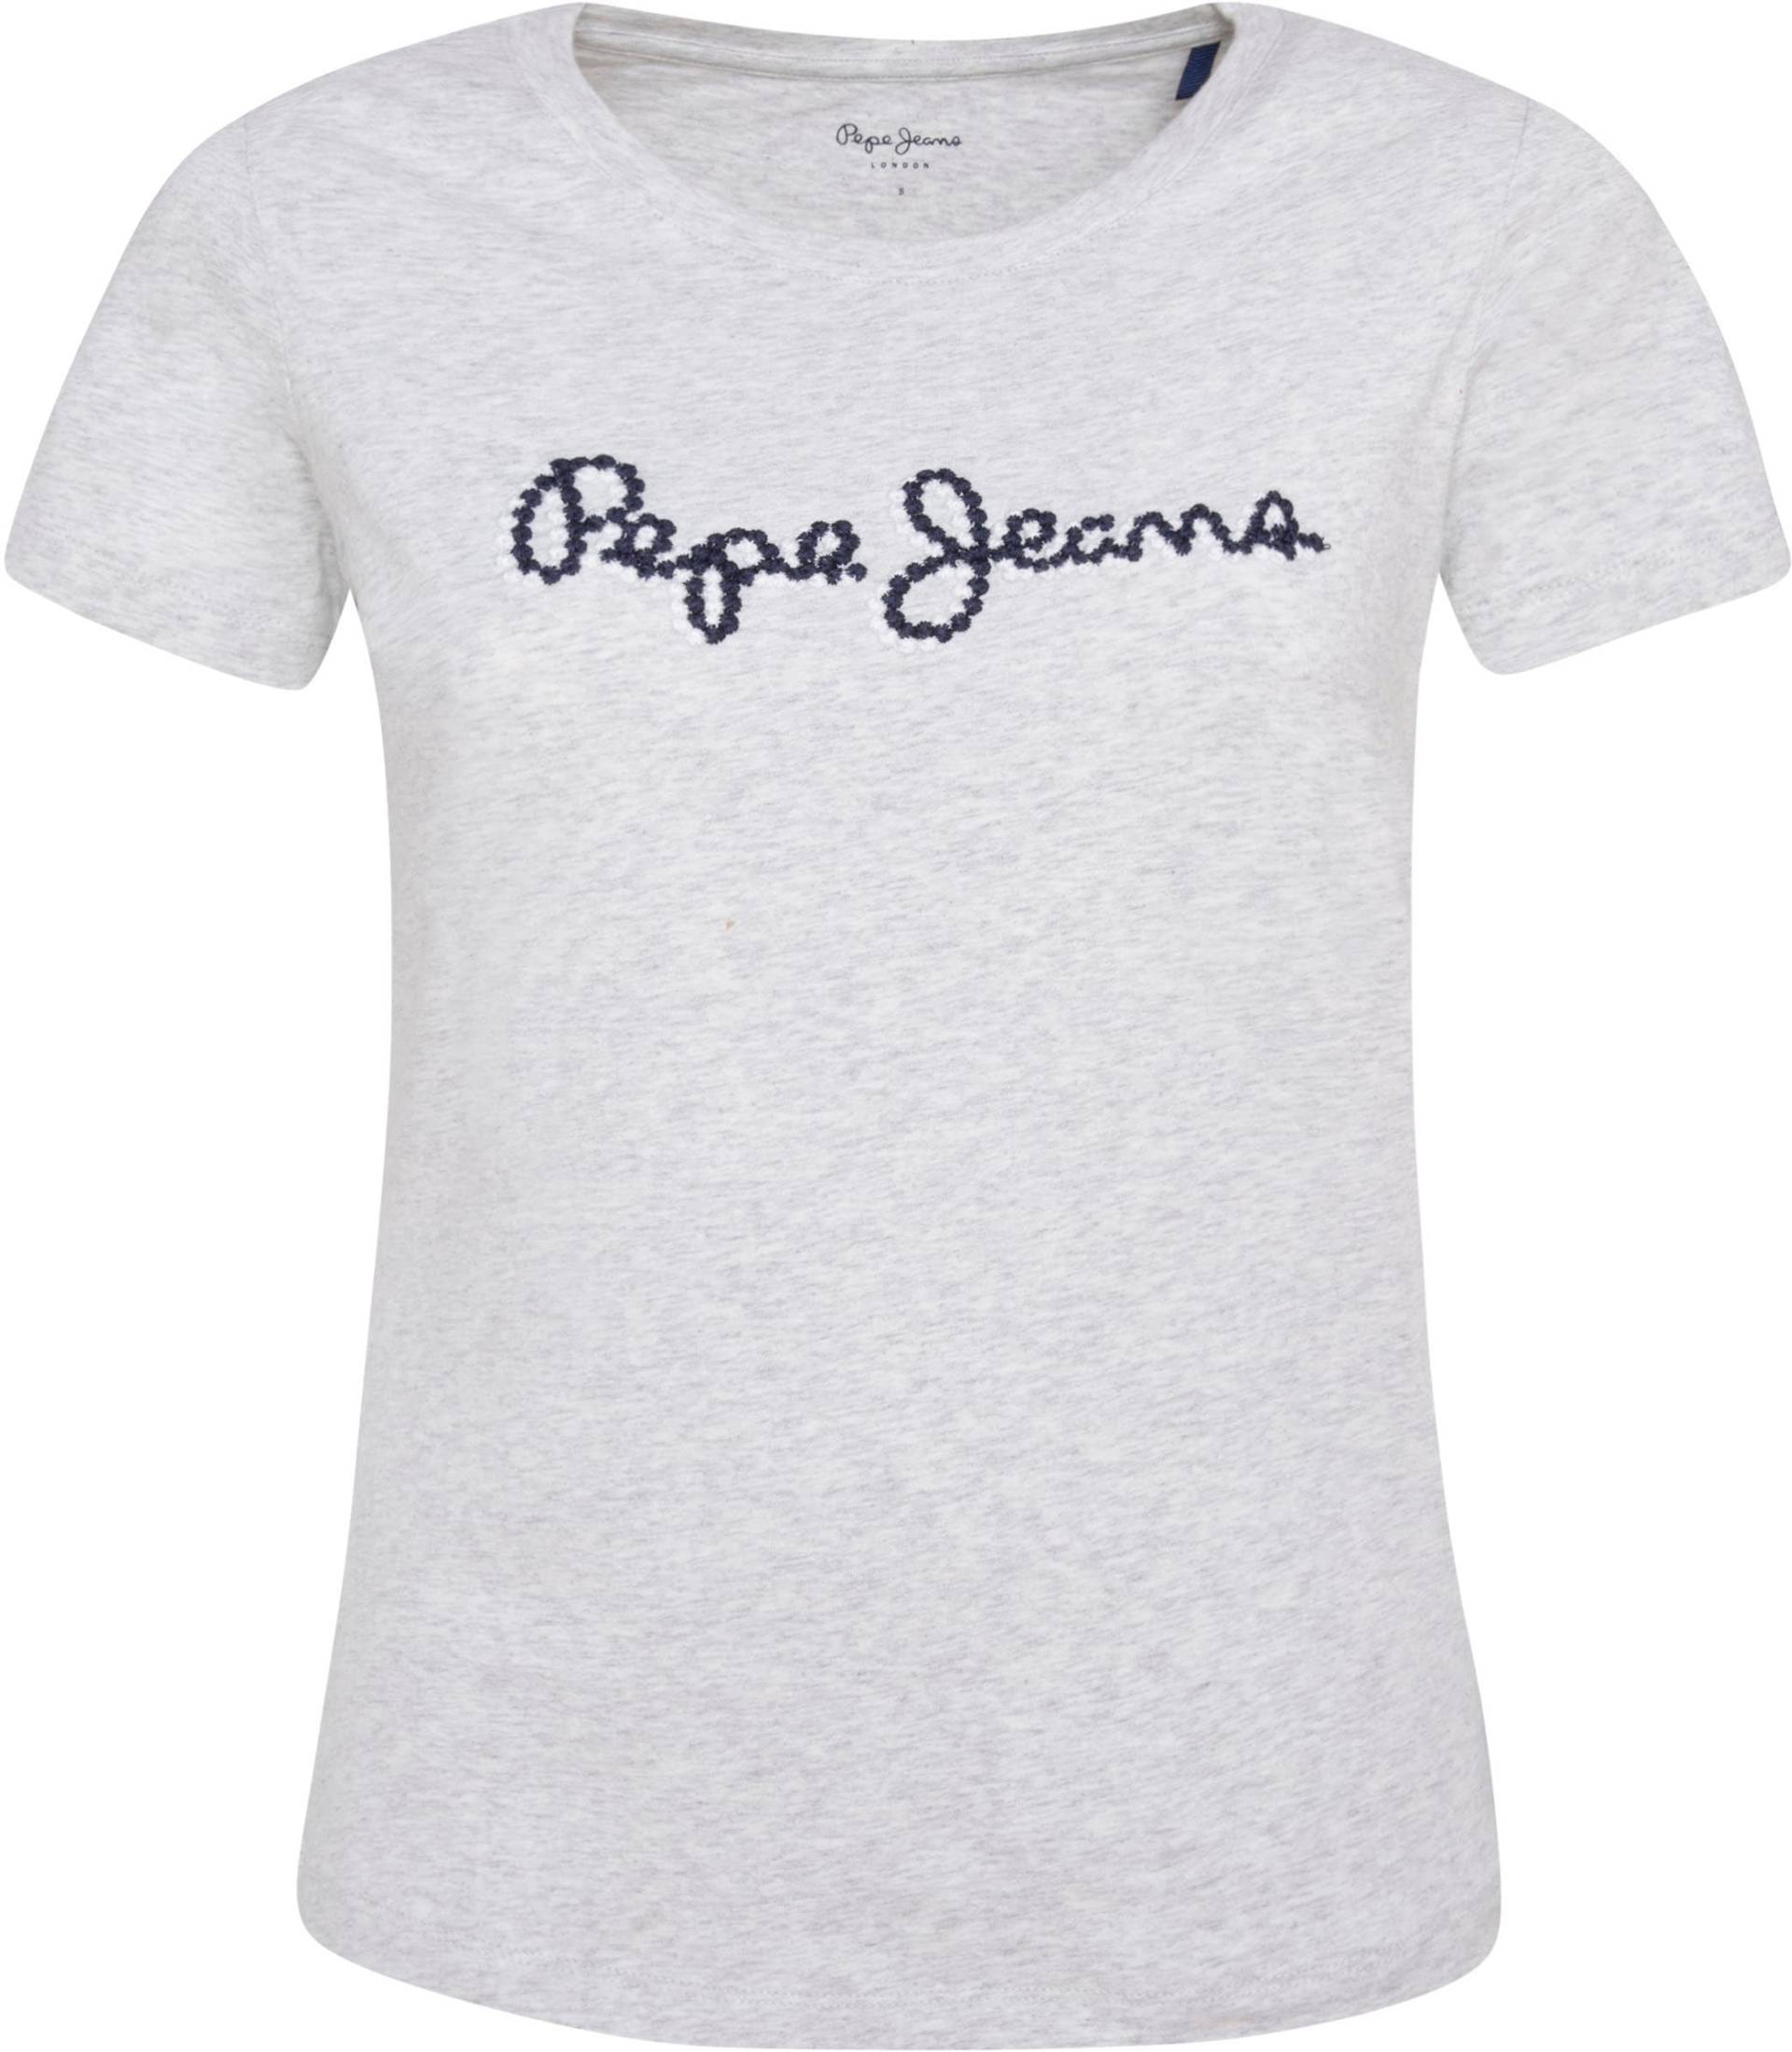 Pepe Jeans T-Shirt »BAMBIE«, mit gestickter Logoapplikation von Pepe Jeans